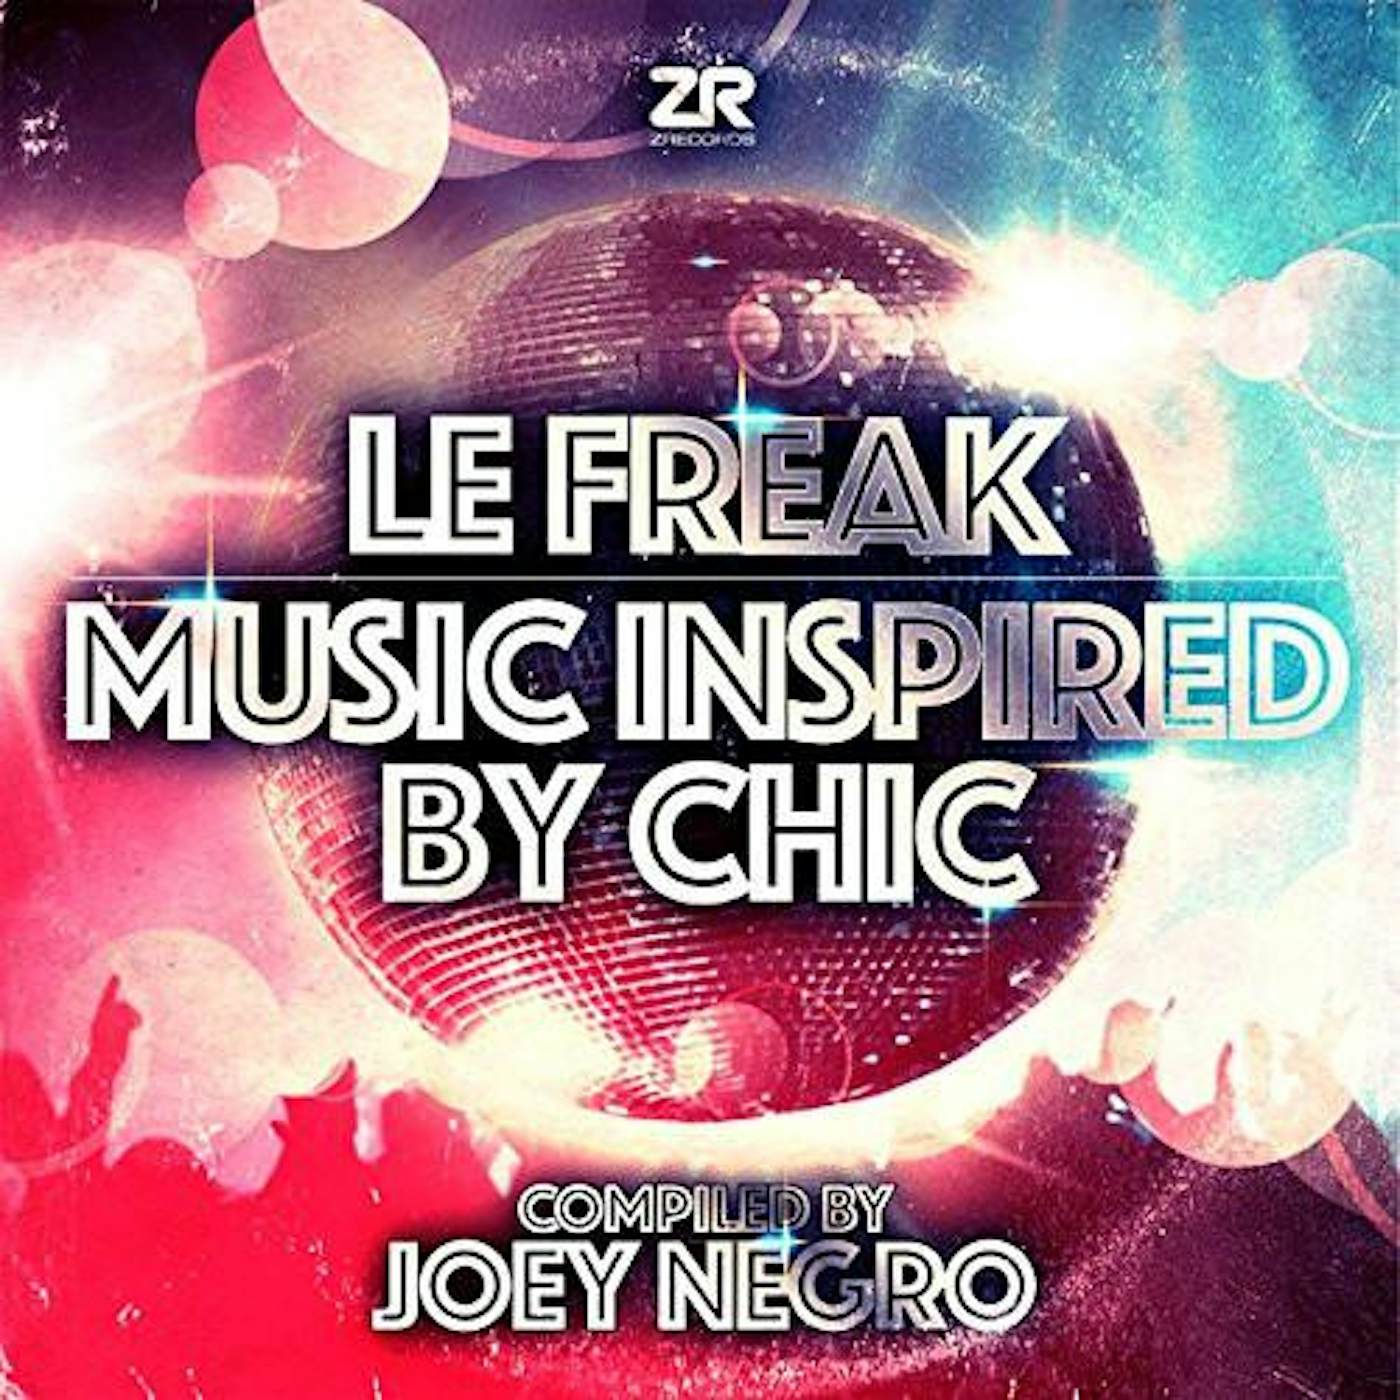 Joey Negro LE FREAK: MUSIC INSPIRED BY CHIC CD